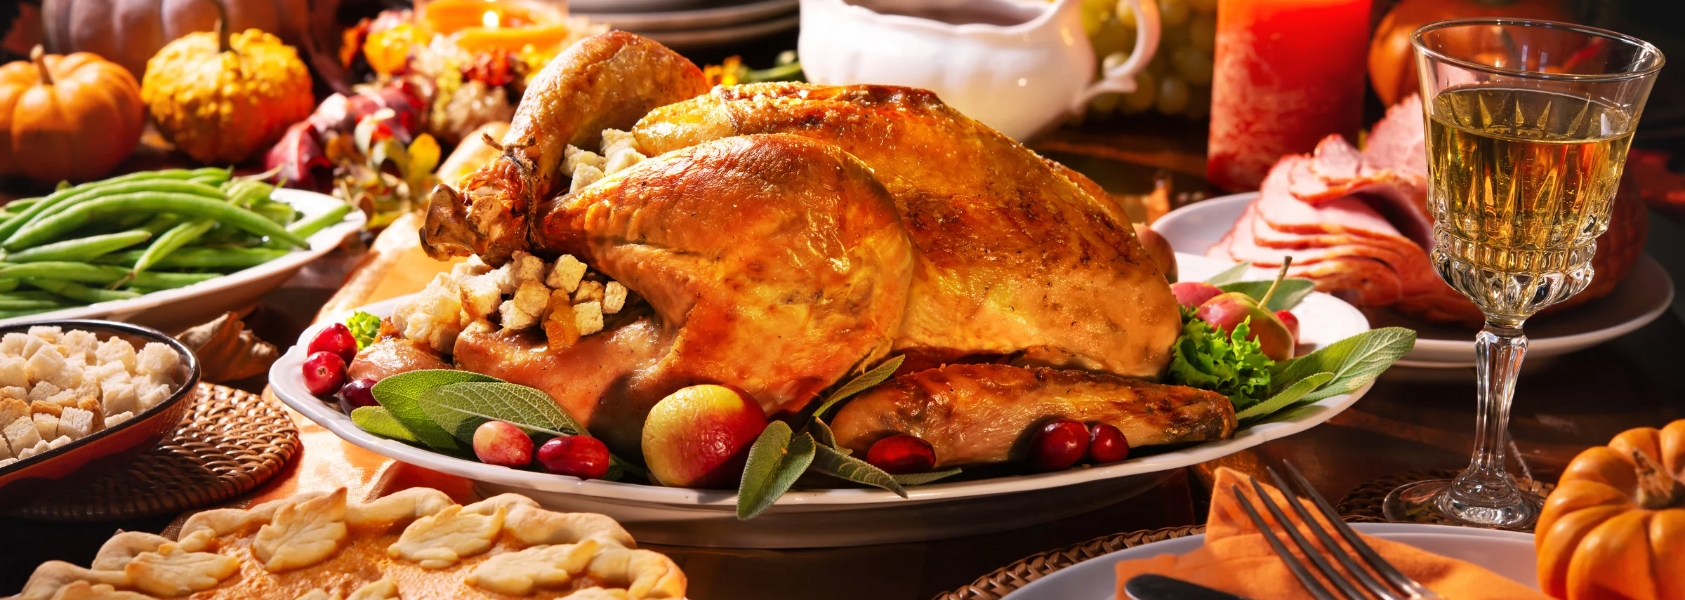 Thanksgiving as Wives: A Conversation About The Holidays, Family & Food